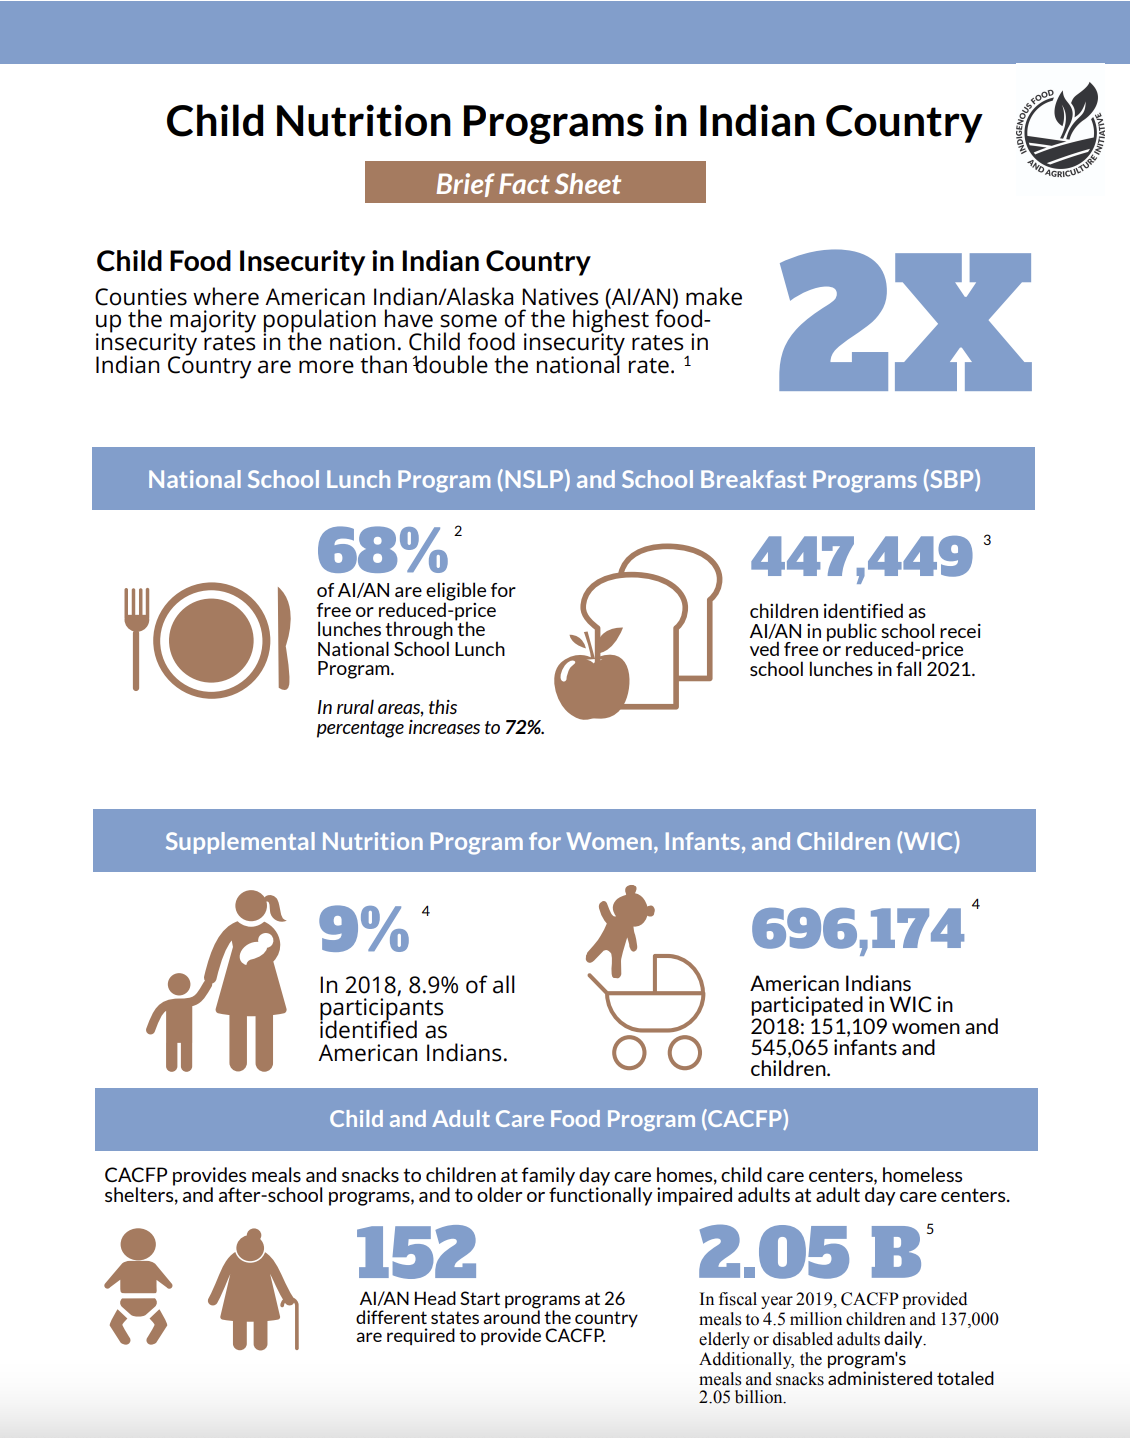 Child Nutrition Programs in Indian Country